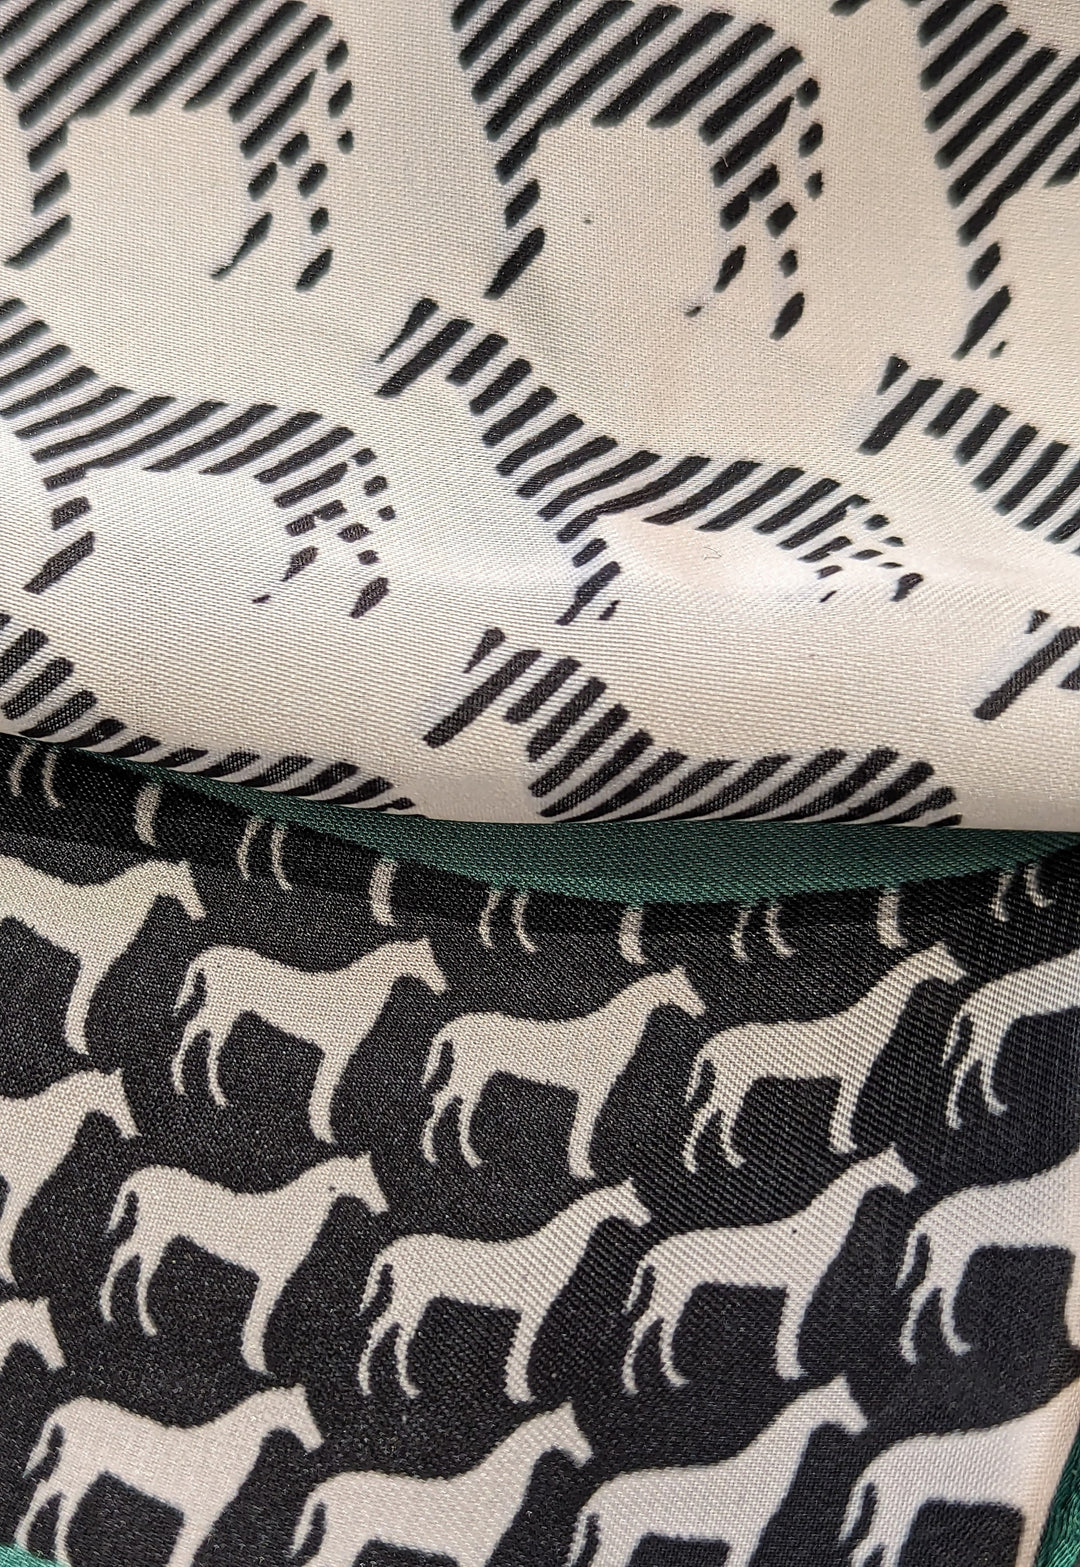 a closer detail of the main repeating horse pattern in a stripe and the border pattern  of horses in a solid white horse outline on black